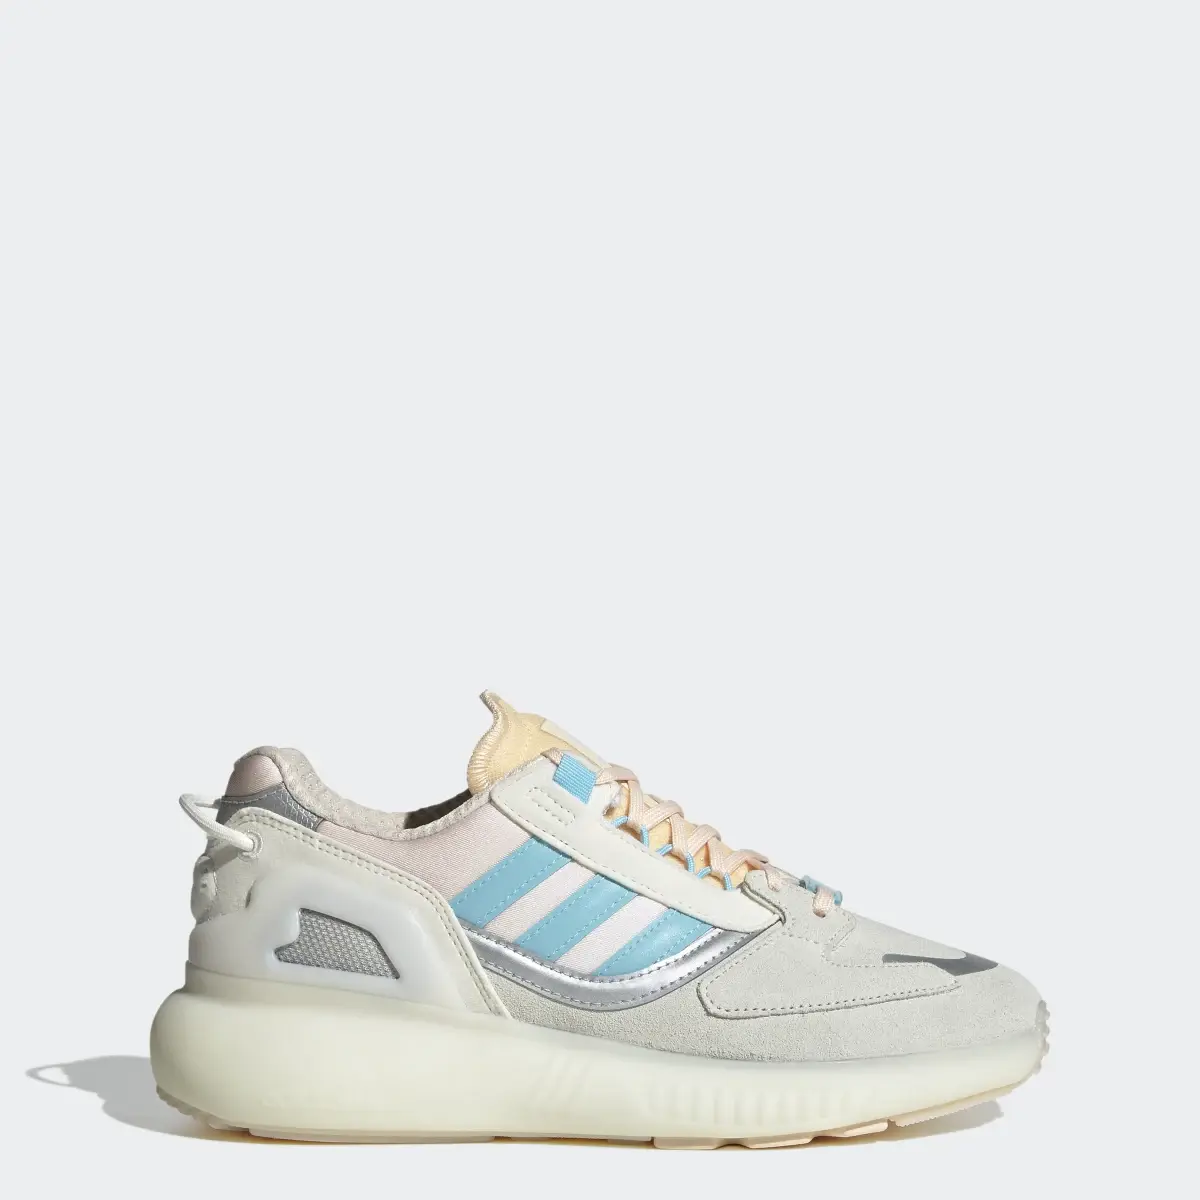 Adidas ZX 5K BOOST Shoes. 1